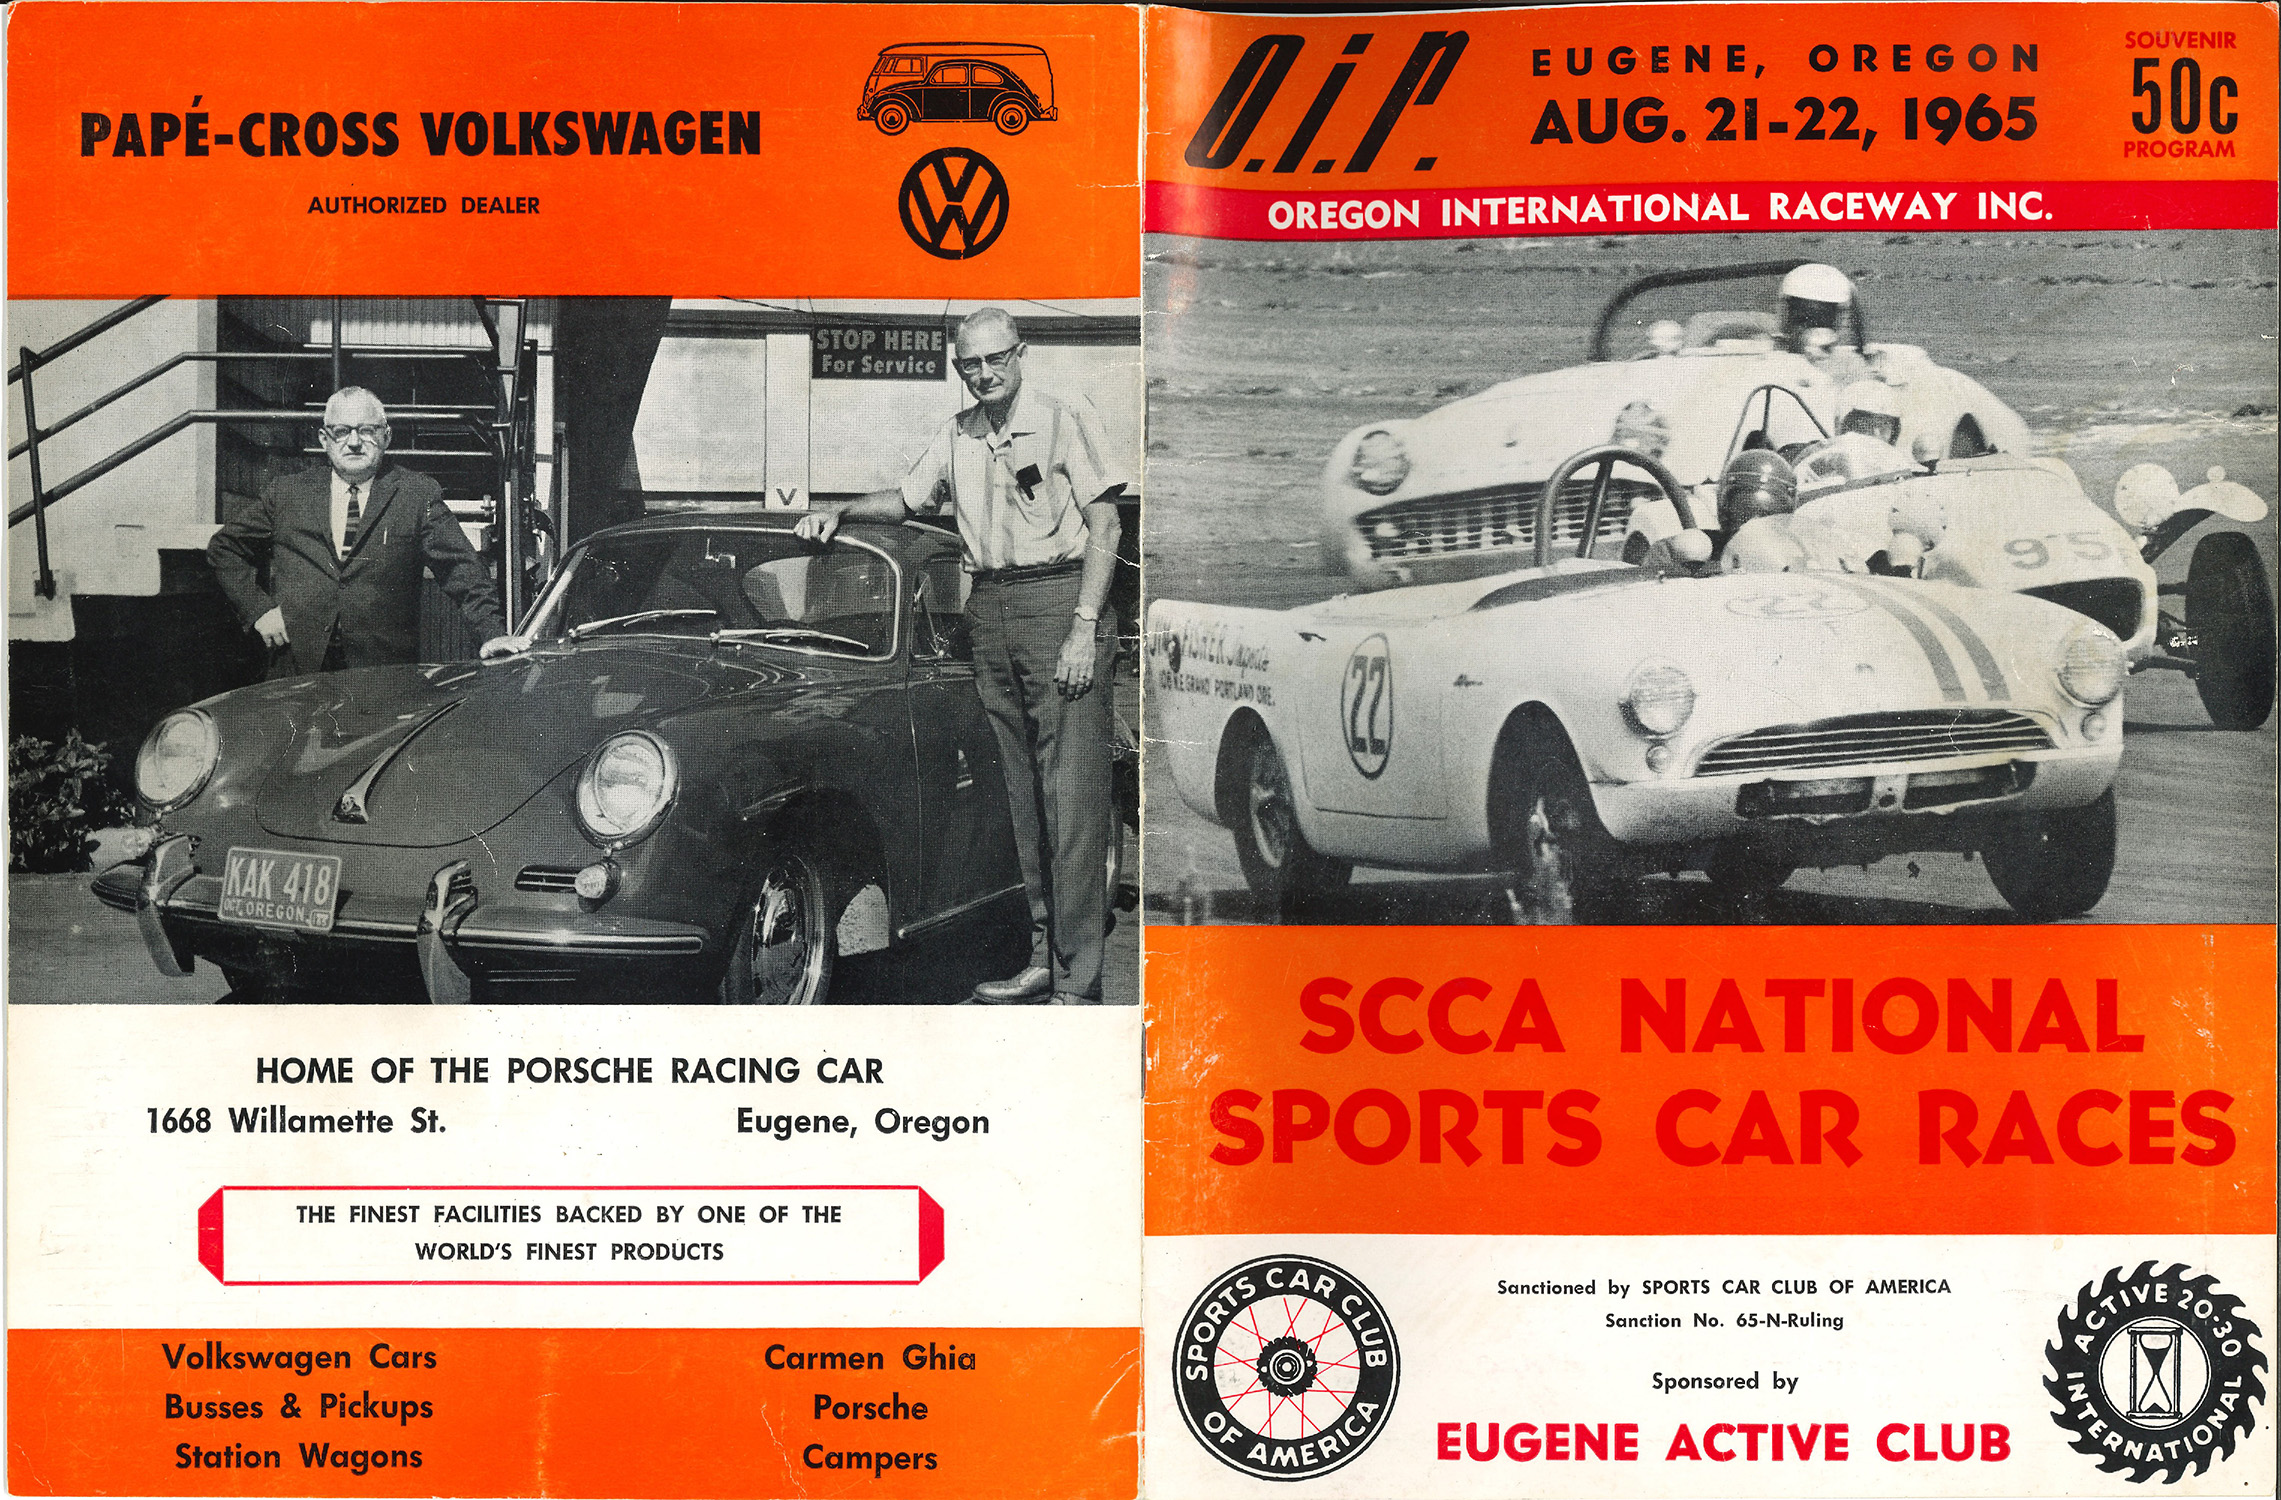 OIR Pamphlet August 1965 with 1965 Race Entry List_Page_01-LR